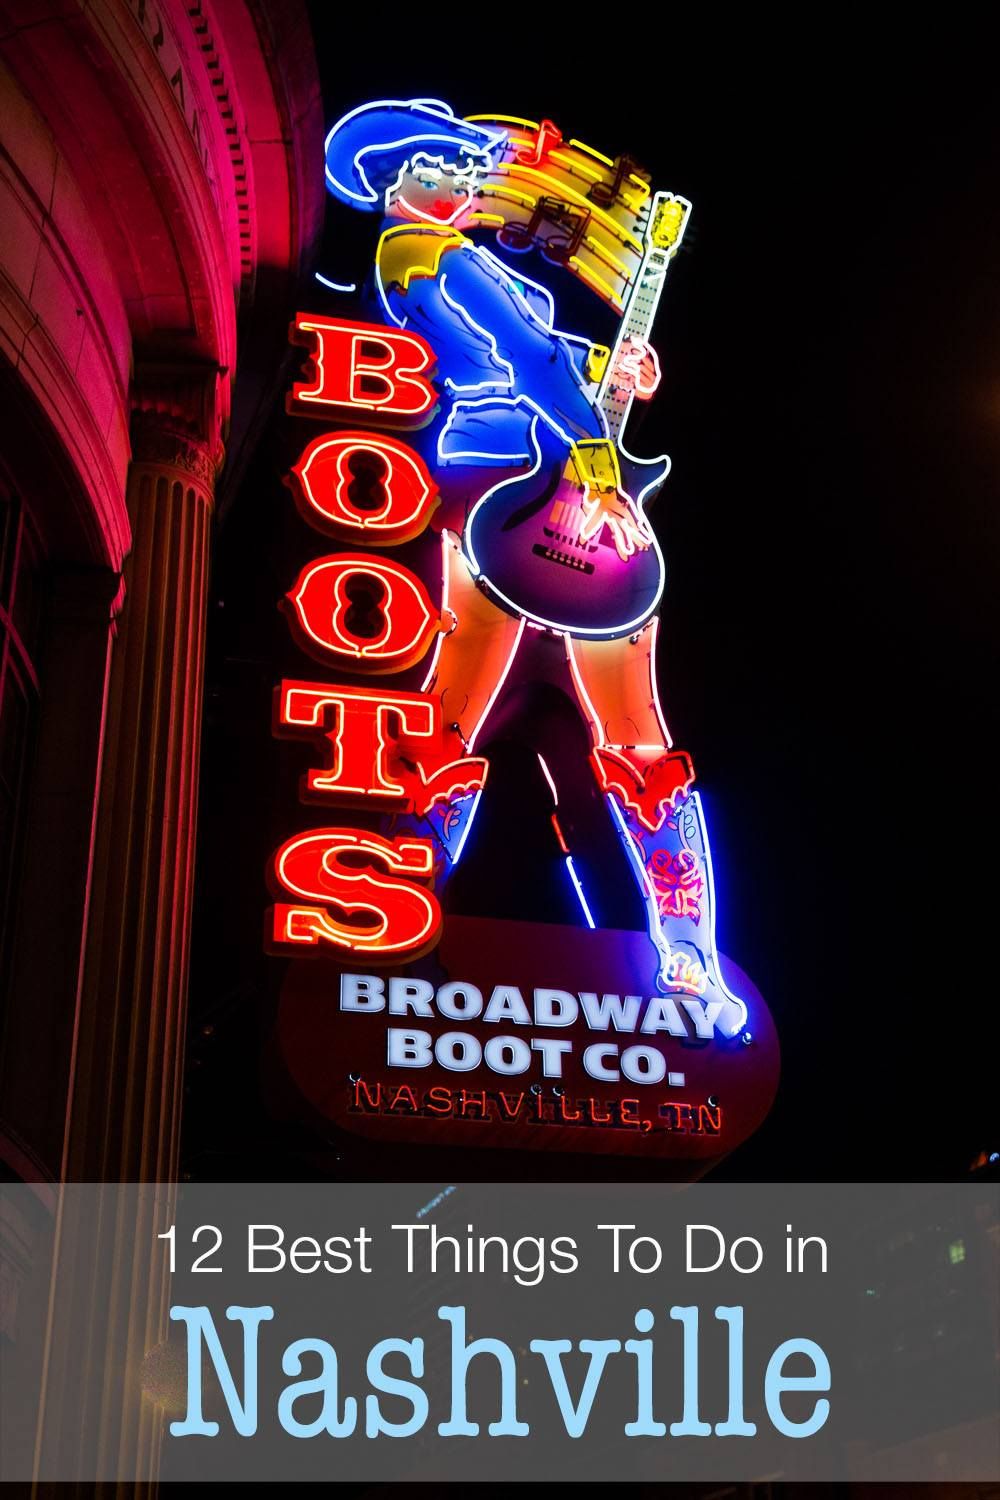 Best things to do in Nashville